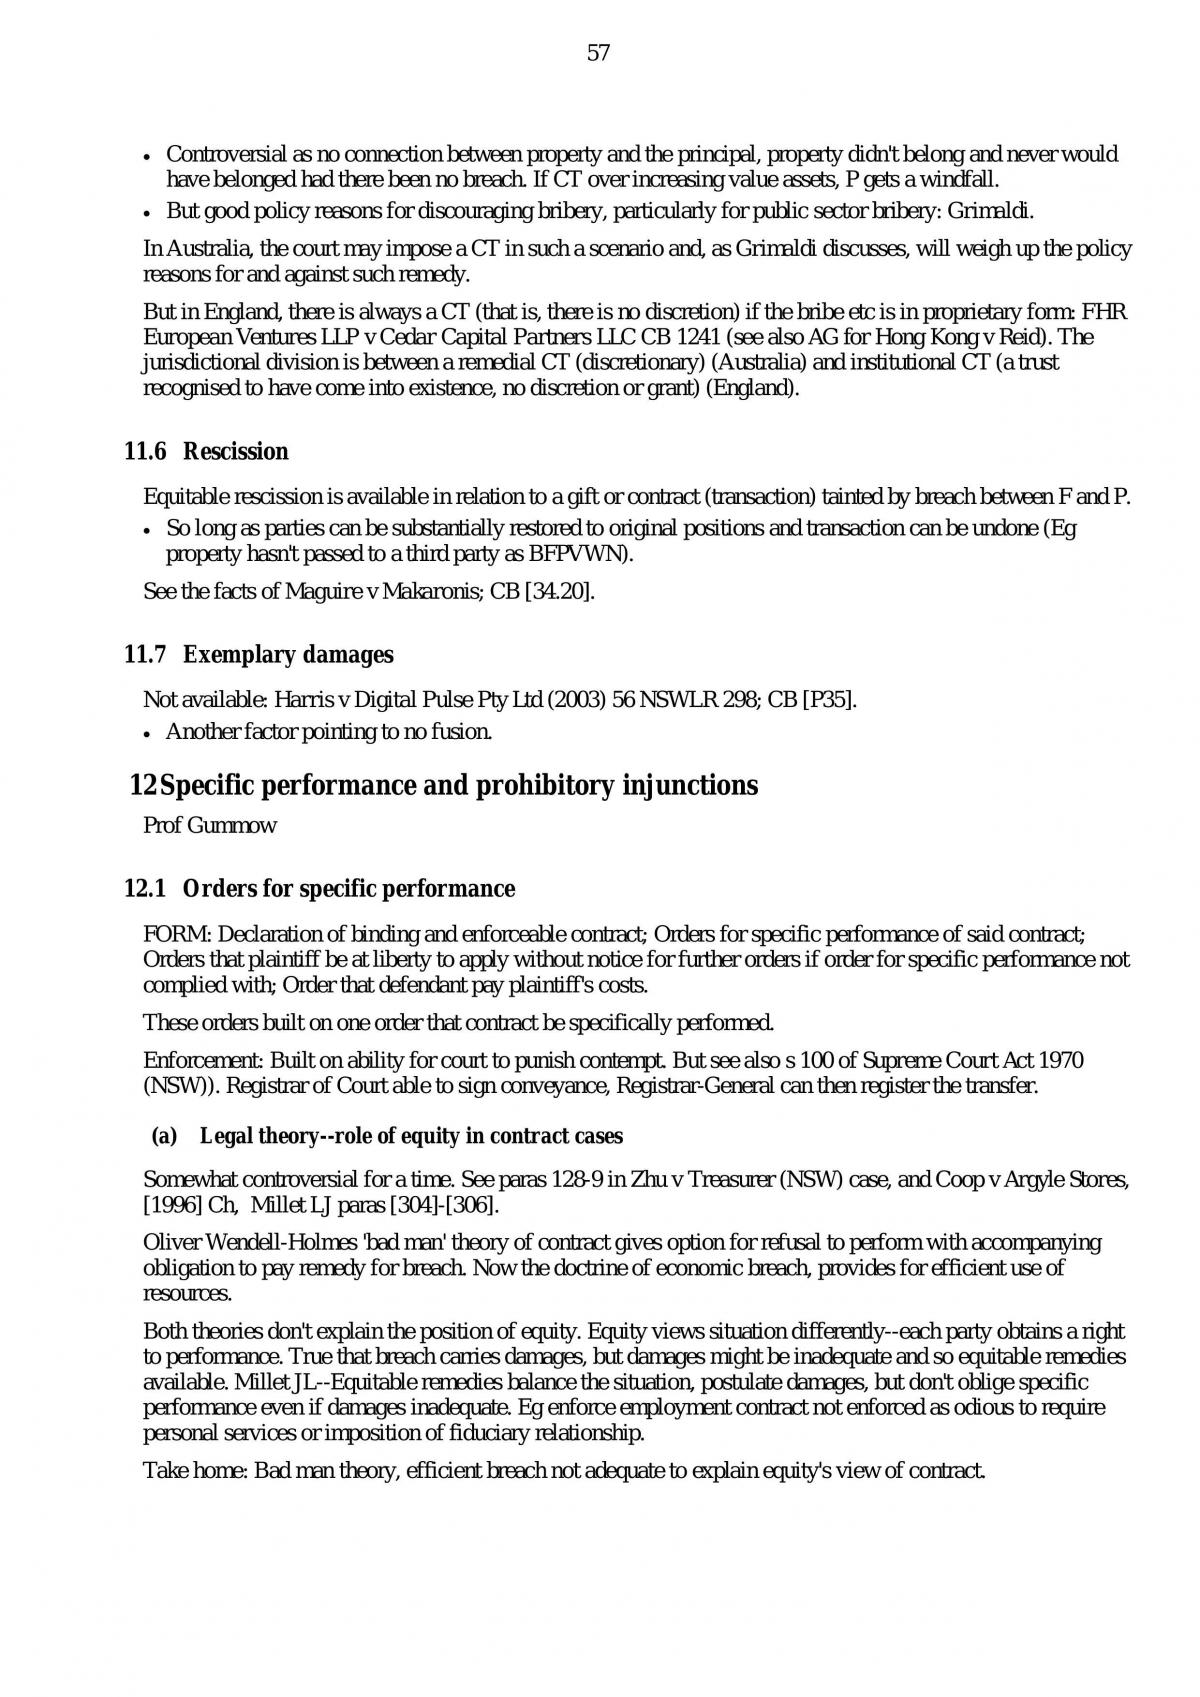 Complete Notes for LAWS6205 - Equity and Trusts - Page 57